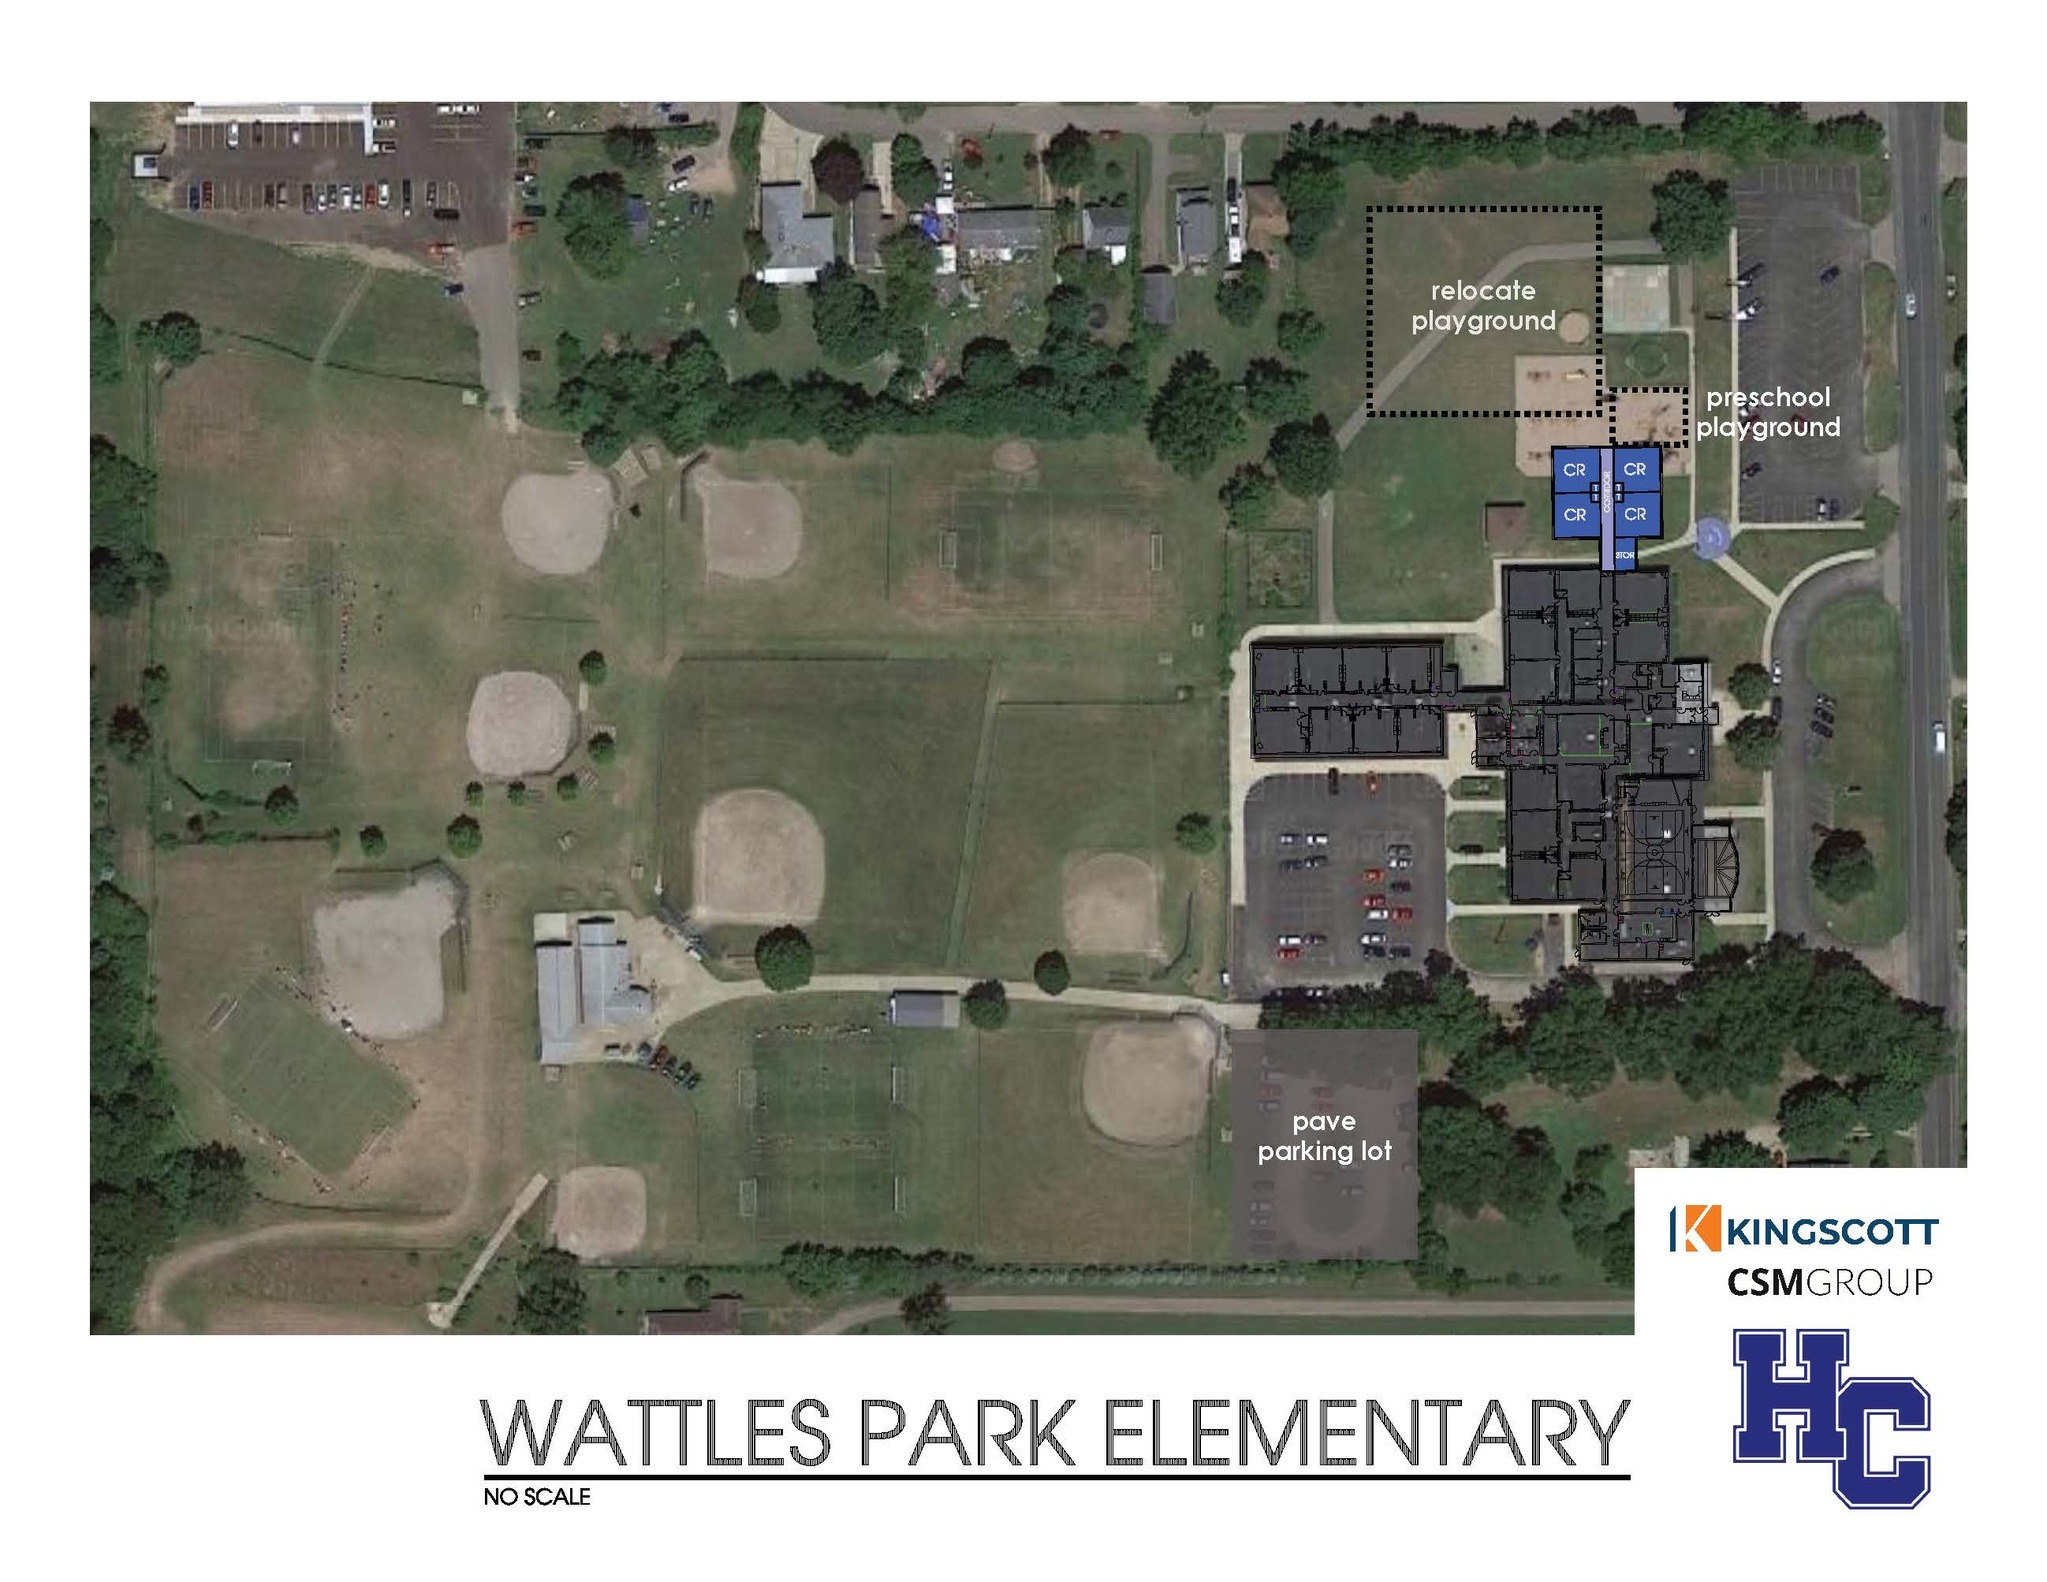 Wattle Park Elementary proposed addition